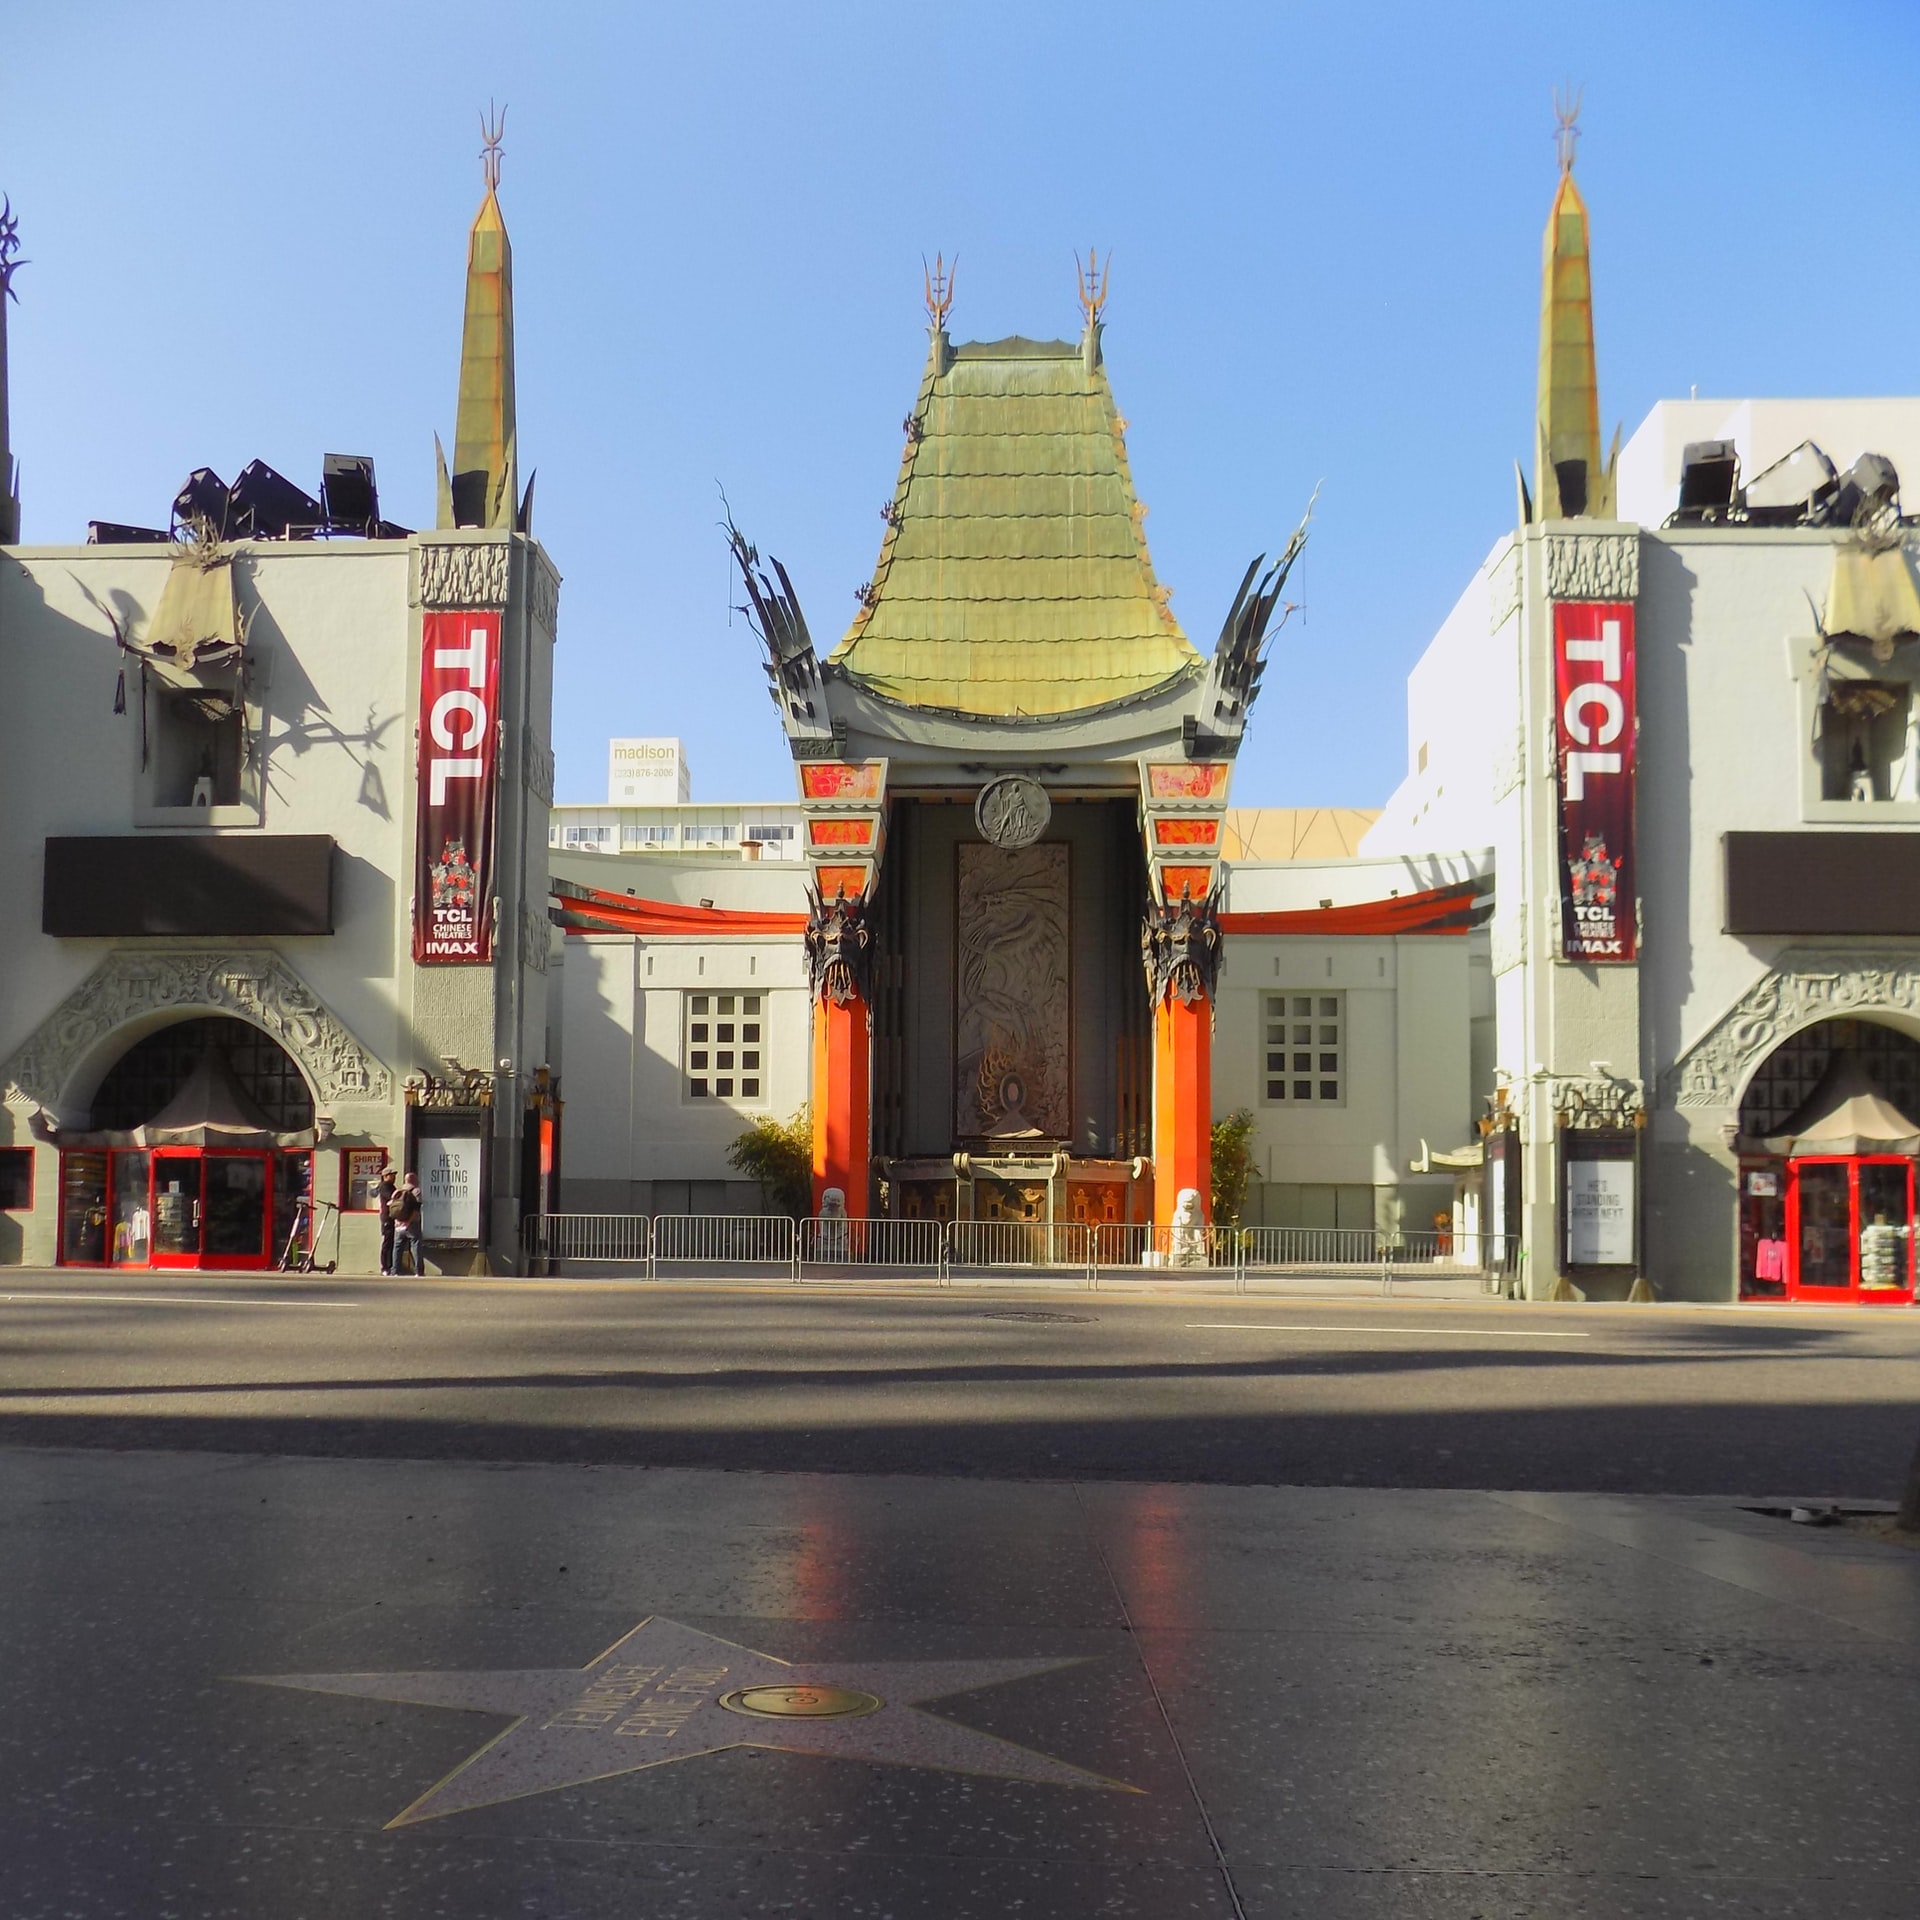 Grauman's Chinese Theatre in Hollywood